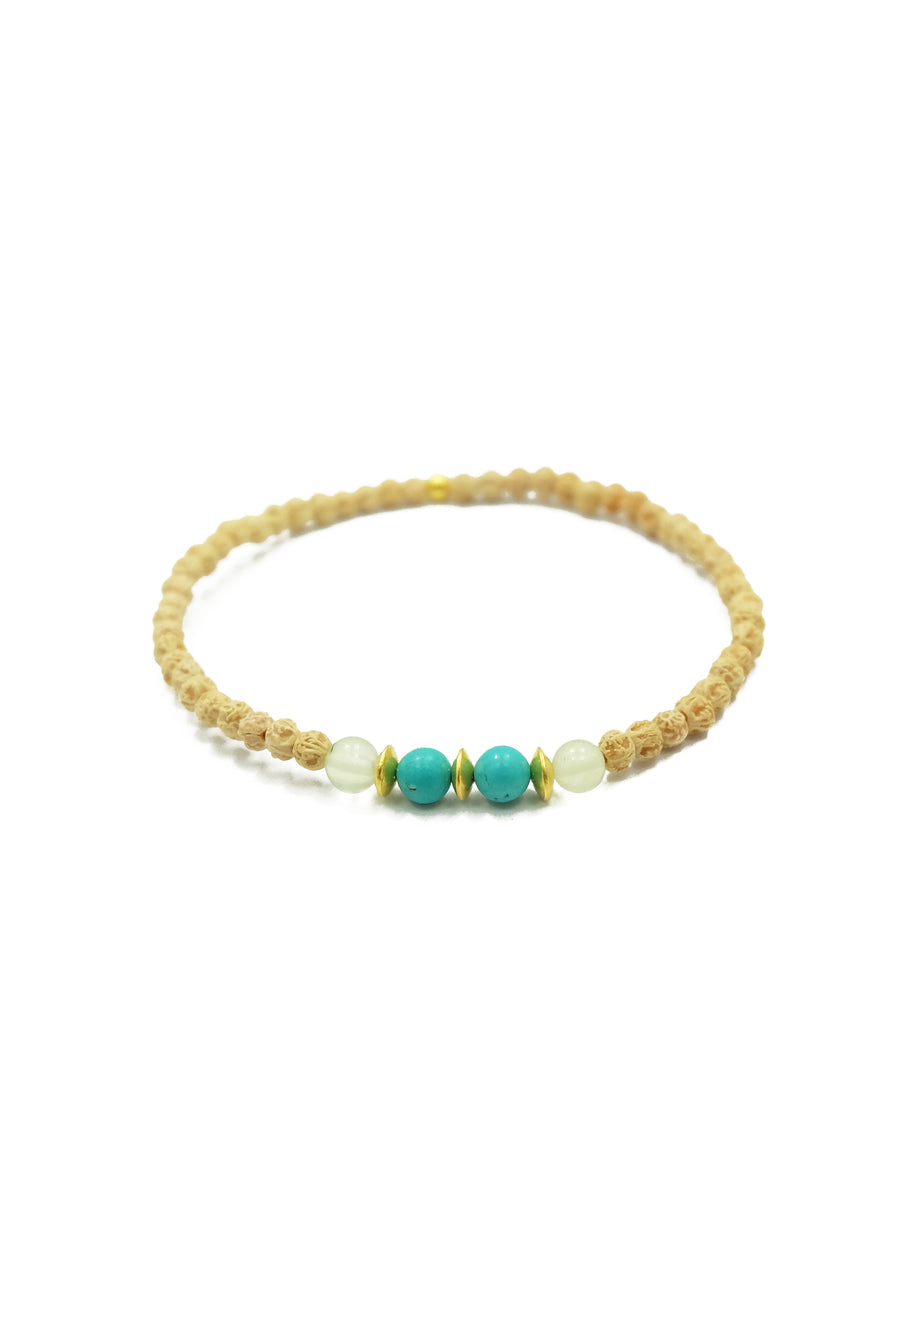  A captivating Lanikai Bracelet, designed to pair perfectly with the Lanikai Sunrise Mala Necklace. The bracelet features delicate 2mm prehnite, turquoise, and rudrani beads, accented with 22k gold details. Immerse yourself in the blissful essence of weightlessly floating in aquamarine waves under the tropical sun with this enchanting accessory.